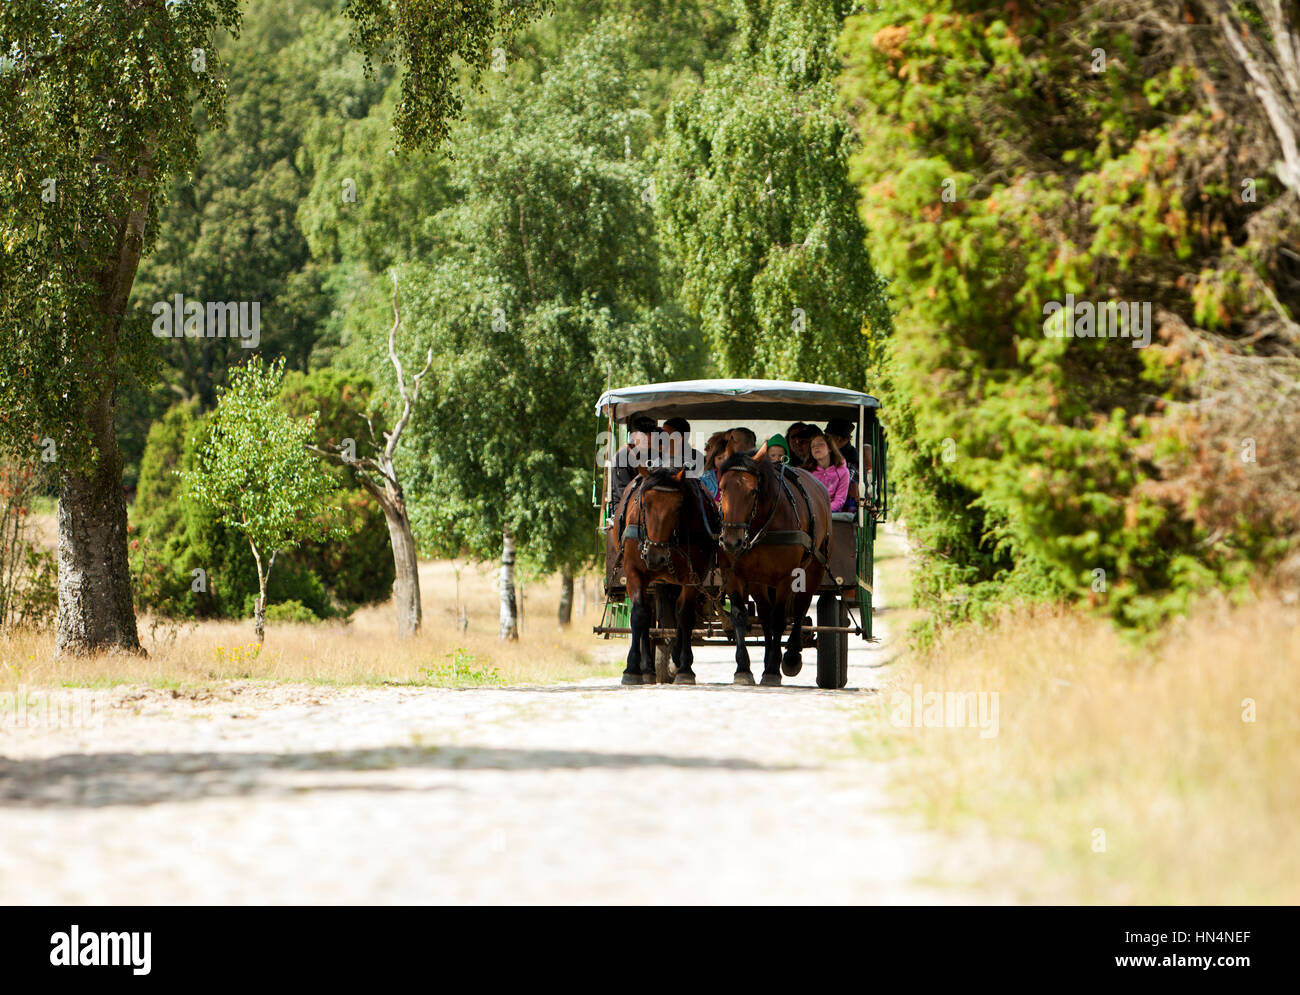 Oberhaverbeck, Germany - August 11, 2012: A horse-drawn carriage carrying tourists through the Lueneburg Heath nature reserve. The Lueneburg Heath is  Stock Photo